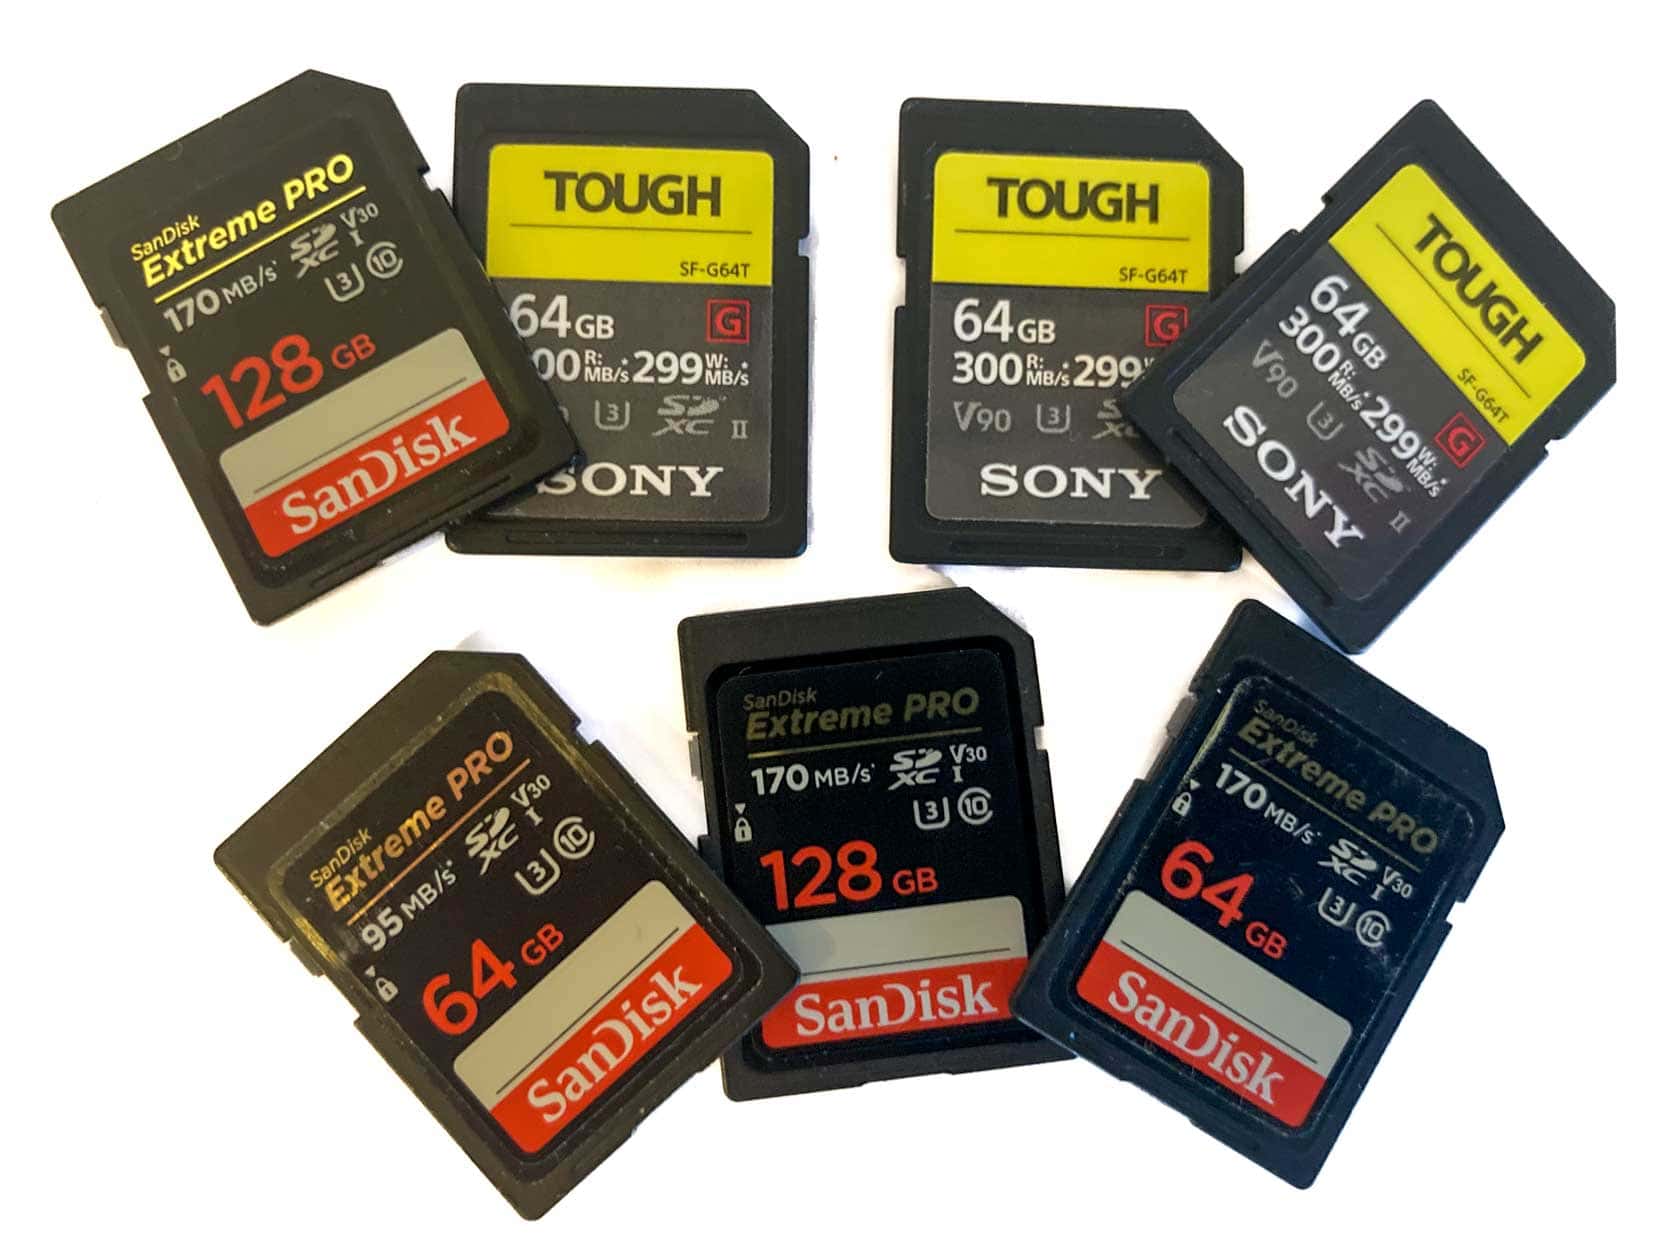 Sony-and-Sandisk-SD-memory-cards